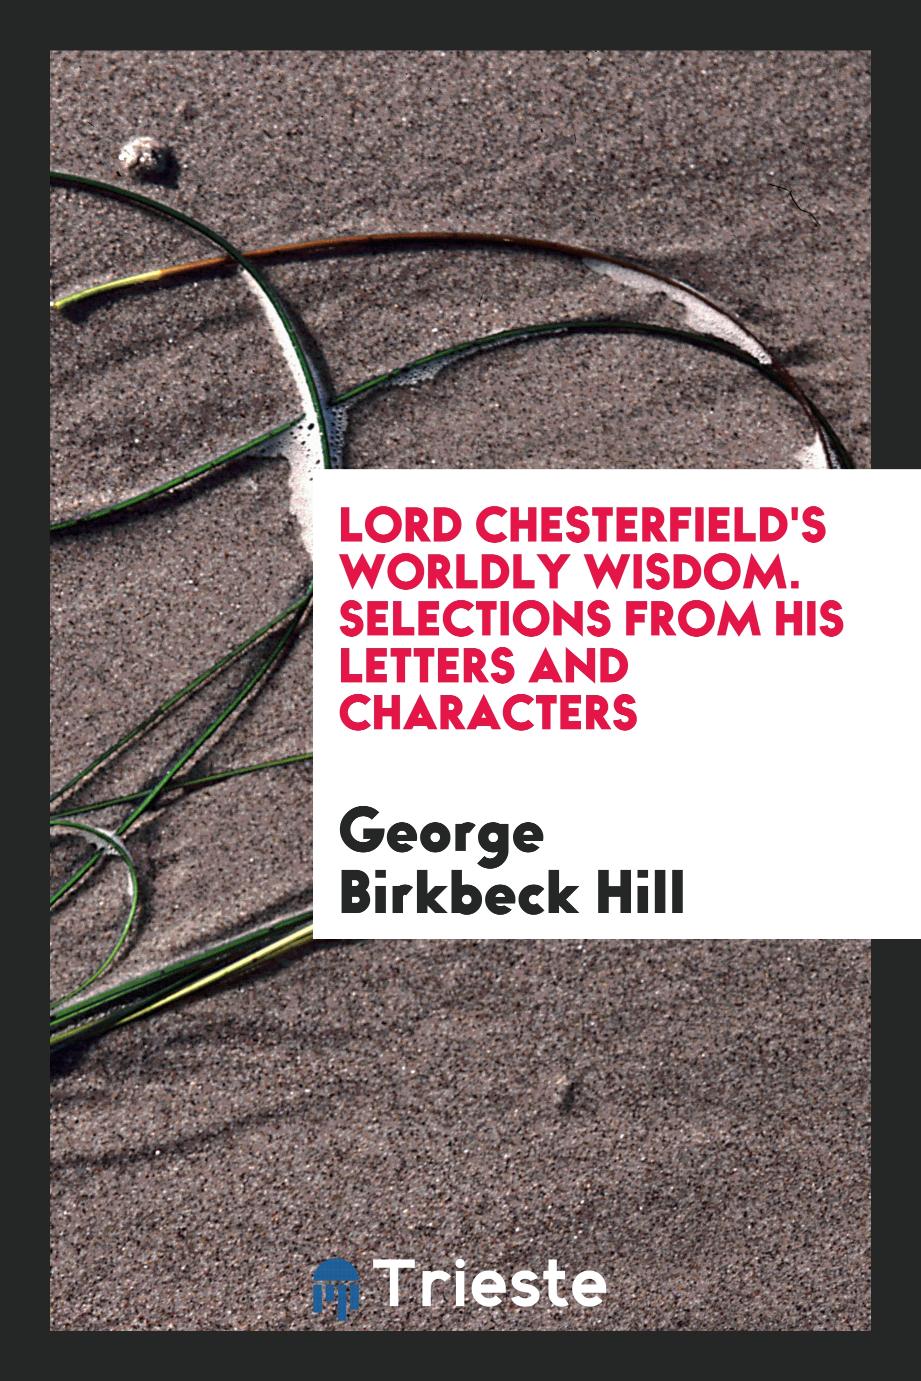 Lord Chesterfield's worldly wisdom. Selections from his letters and characters